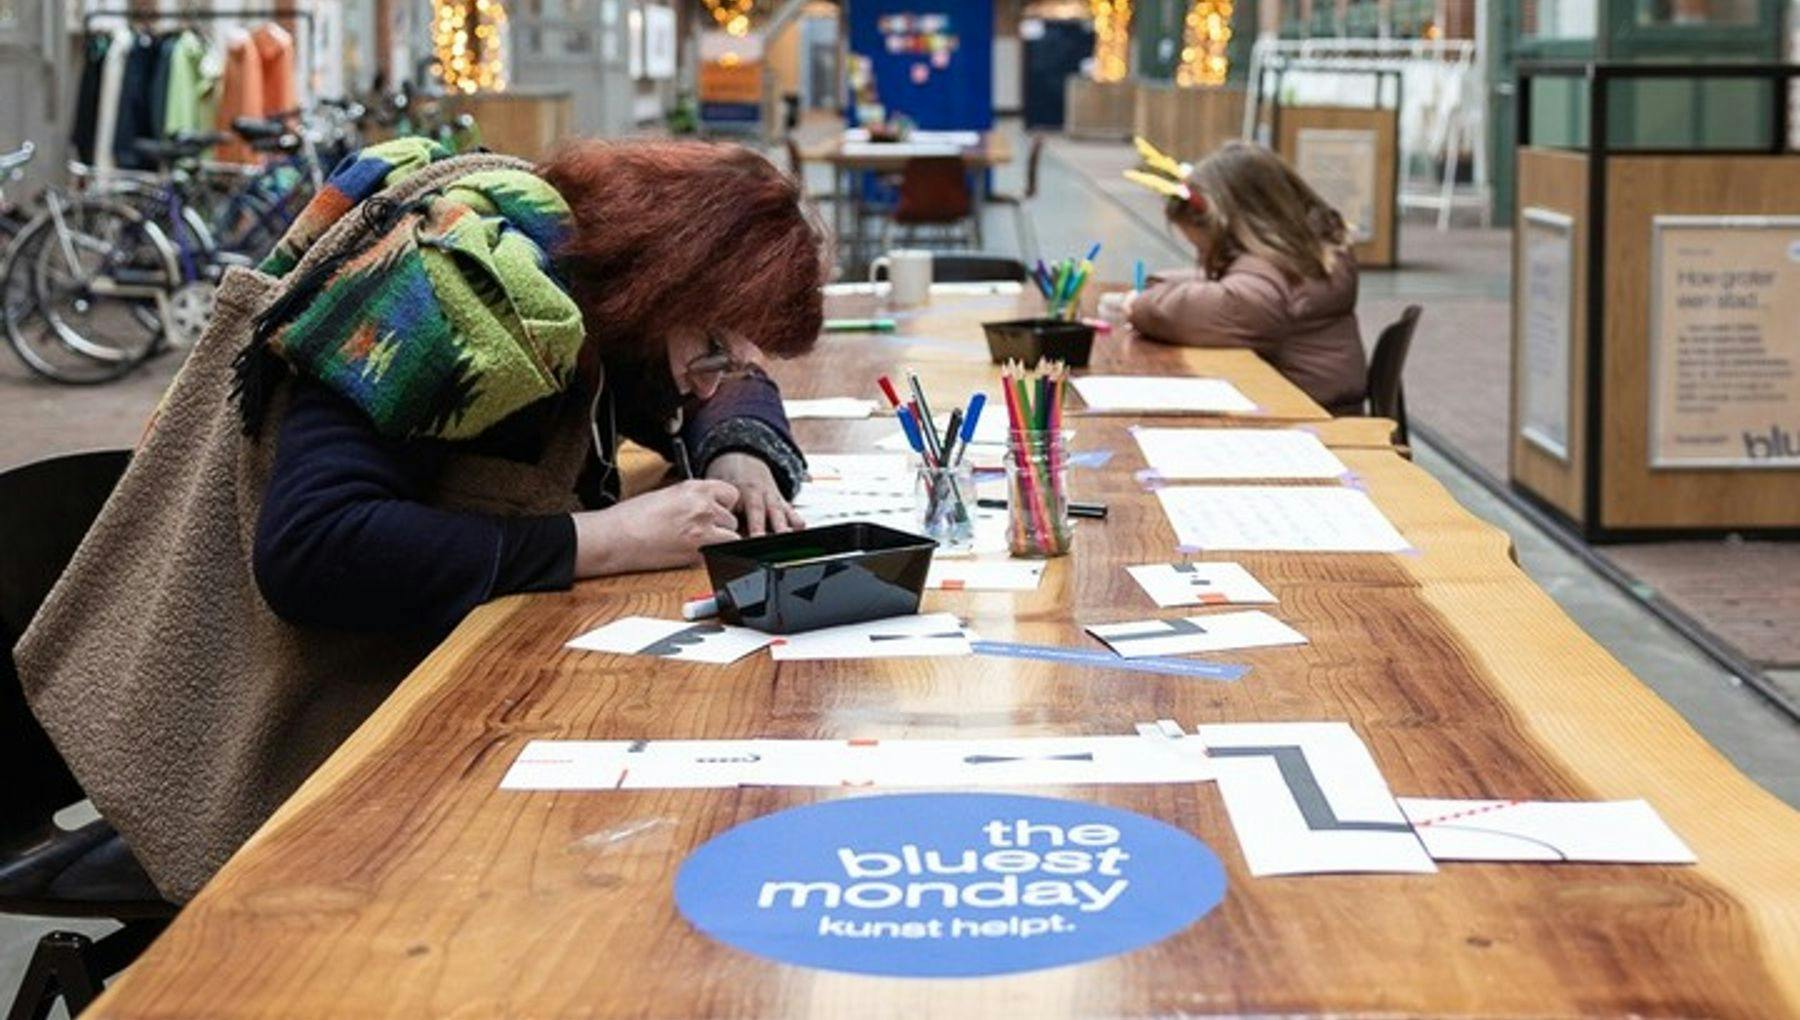 People writing on The Bluest Monday table